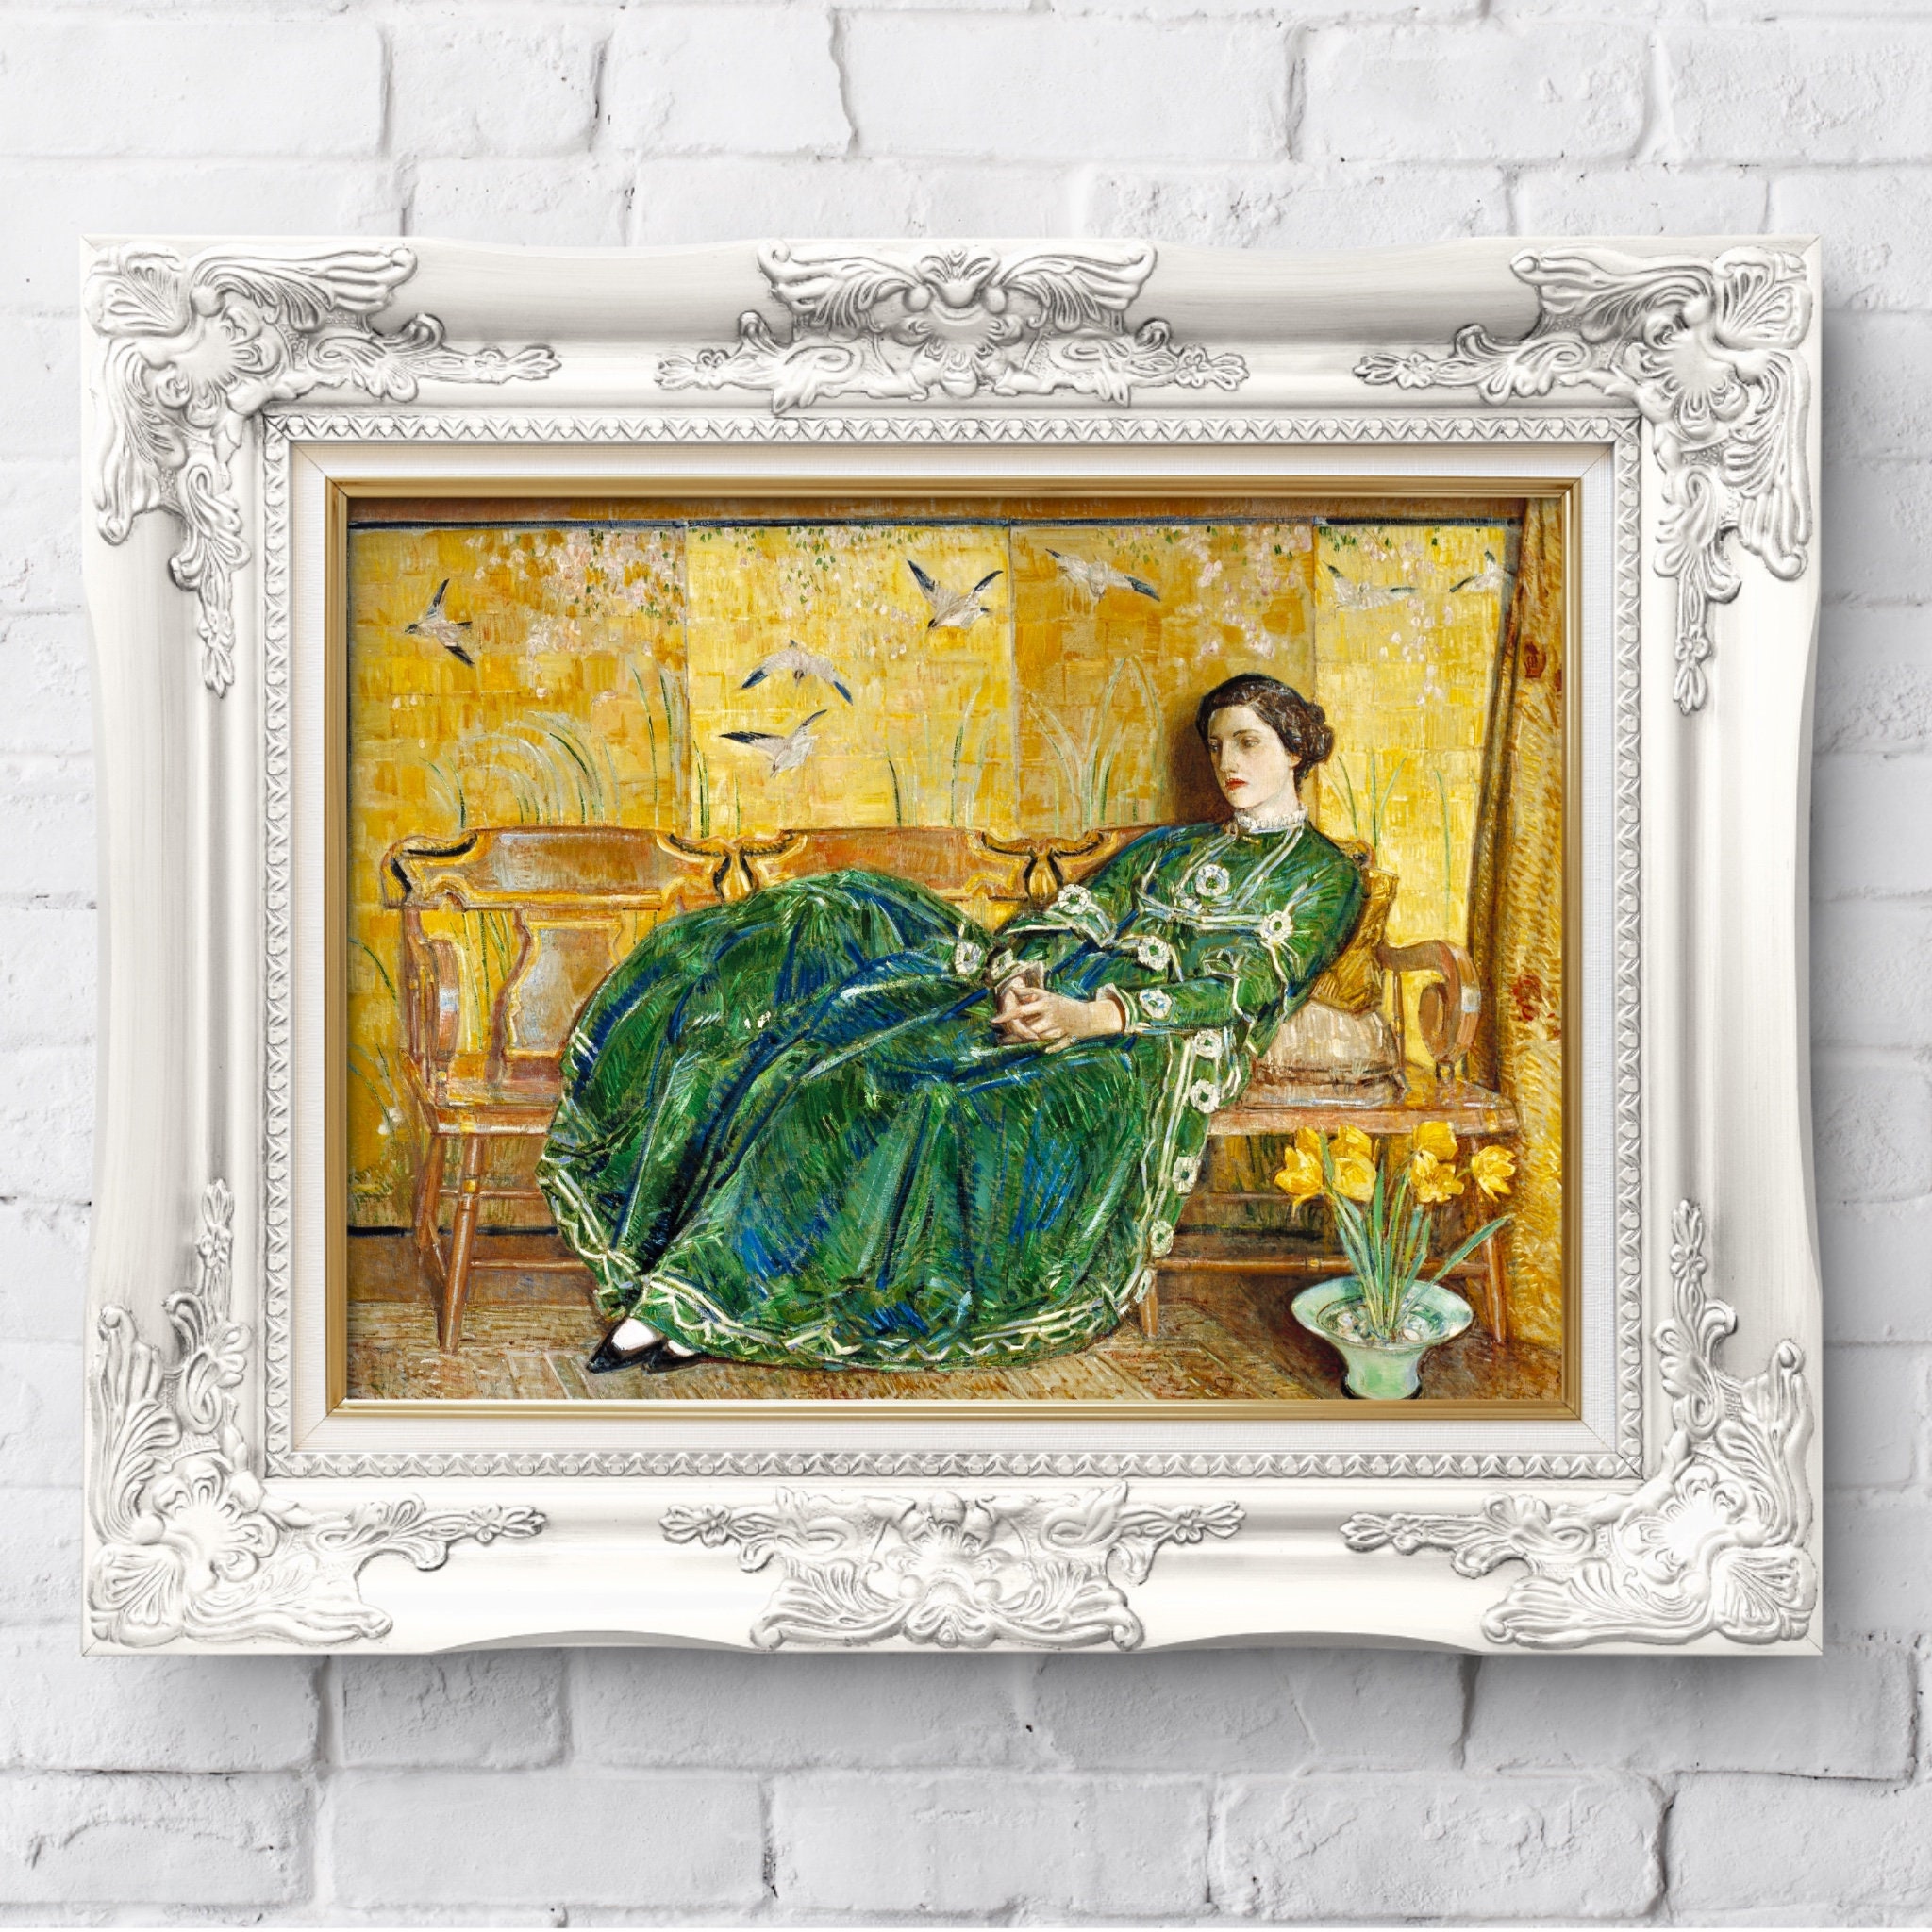 Buy Art For Less Green And Gold Ball Gown Framed On Paper by Lauren Maurer  Painting | Wayfair